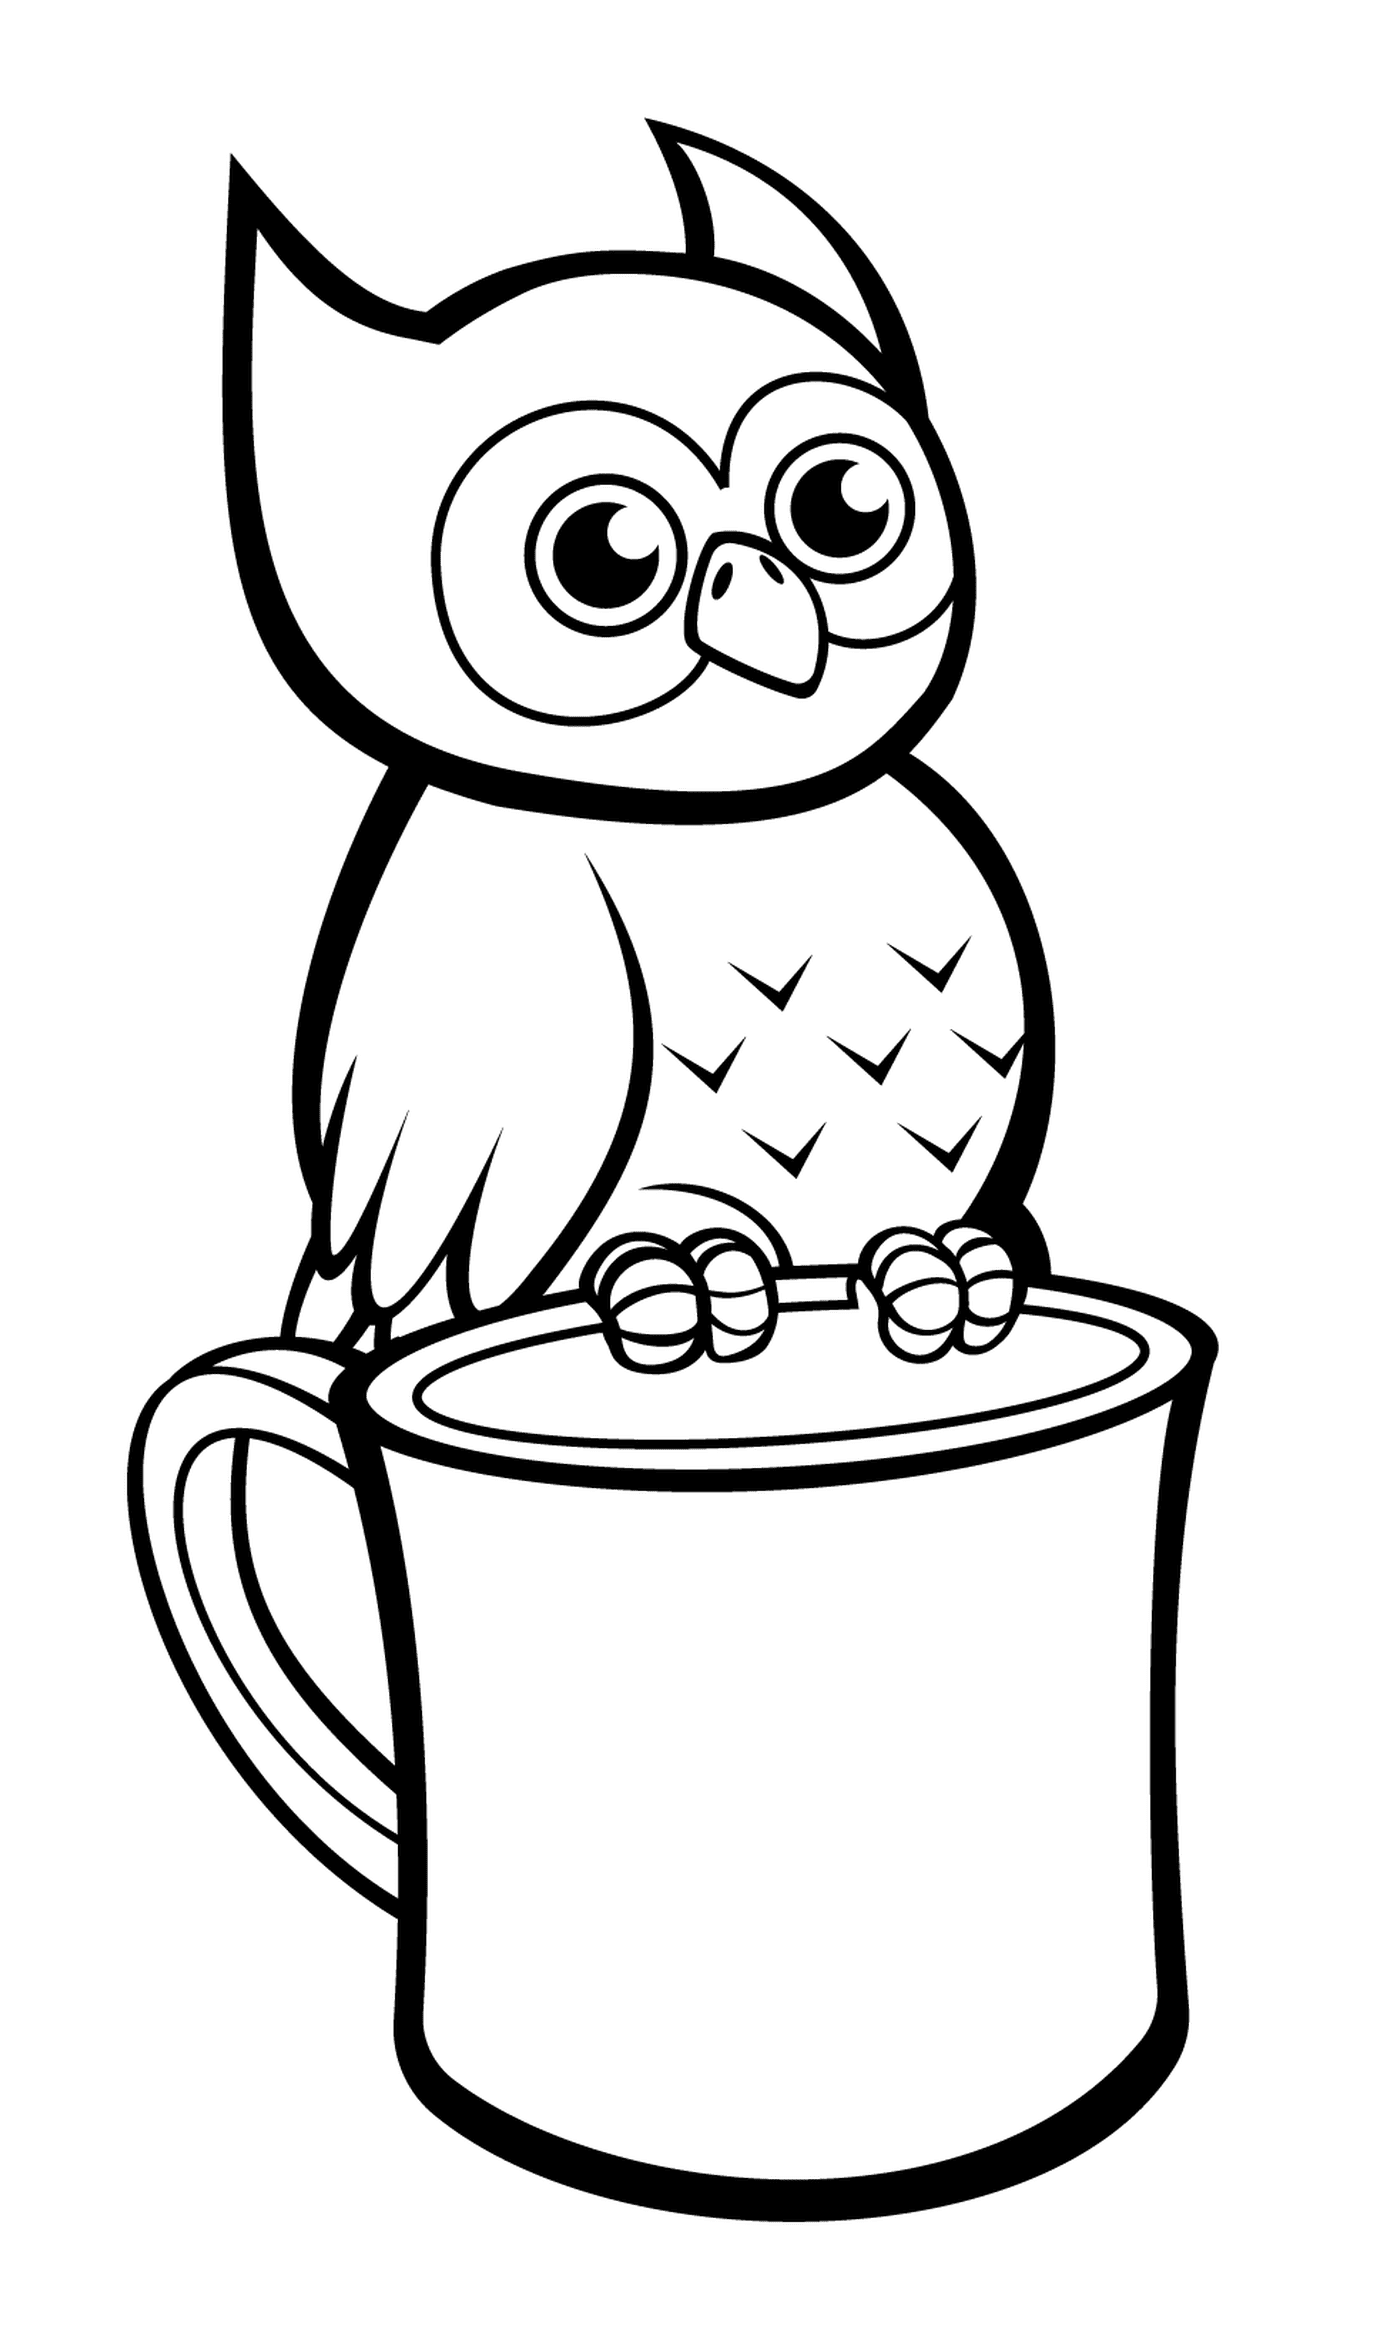  An owl sitting on a cup 